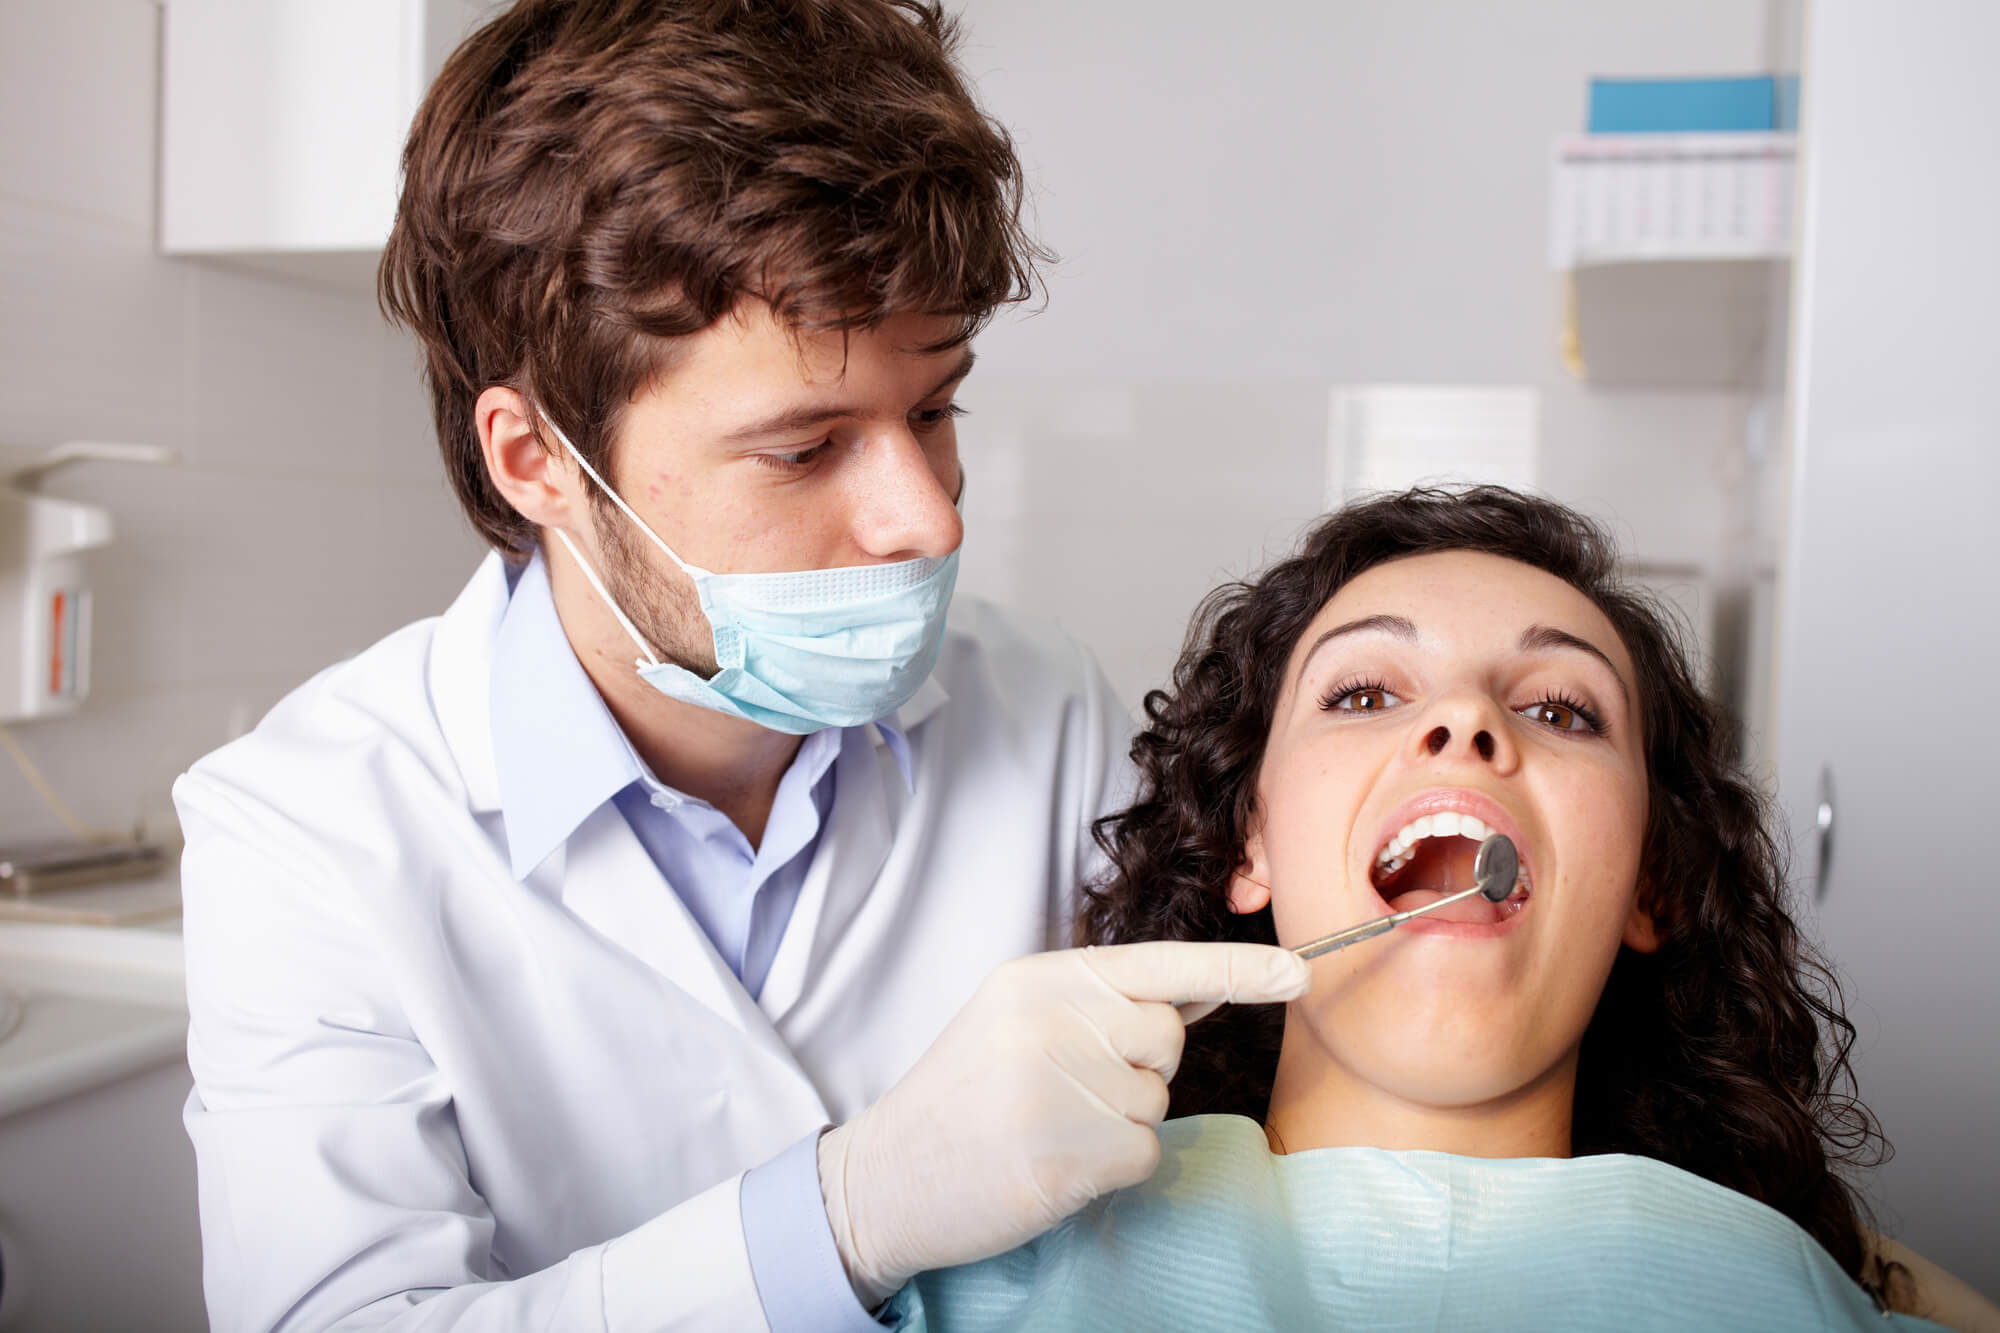 where is the best root canal 23226?